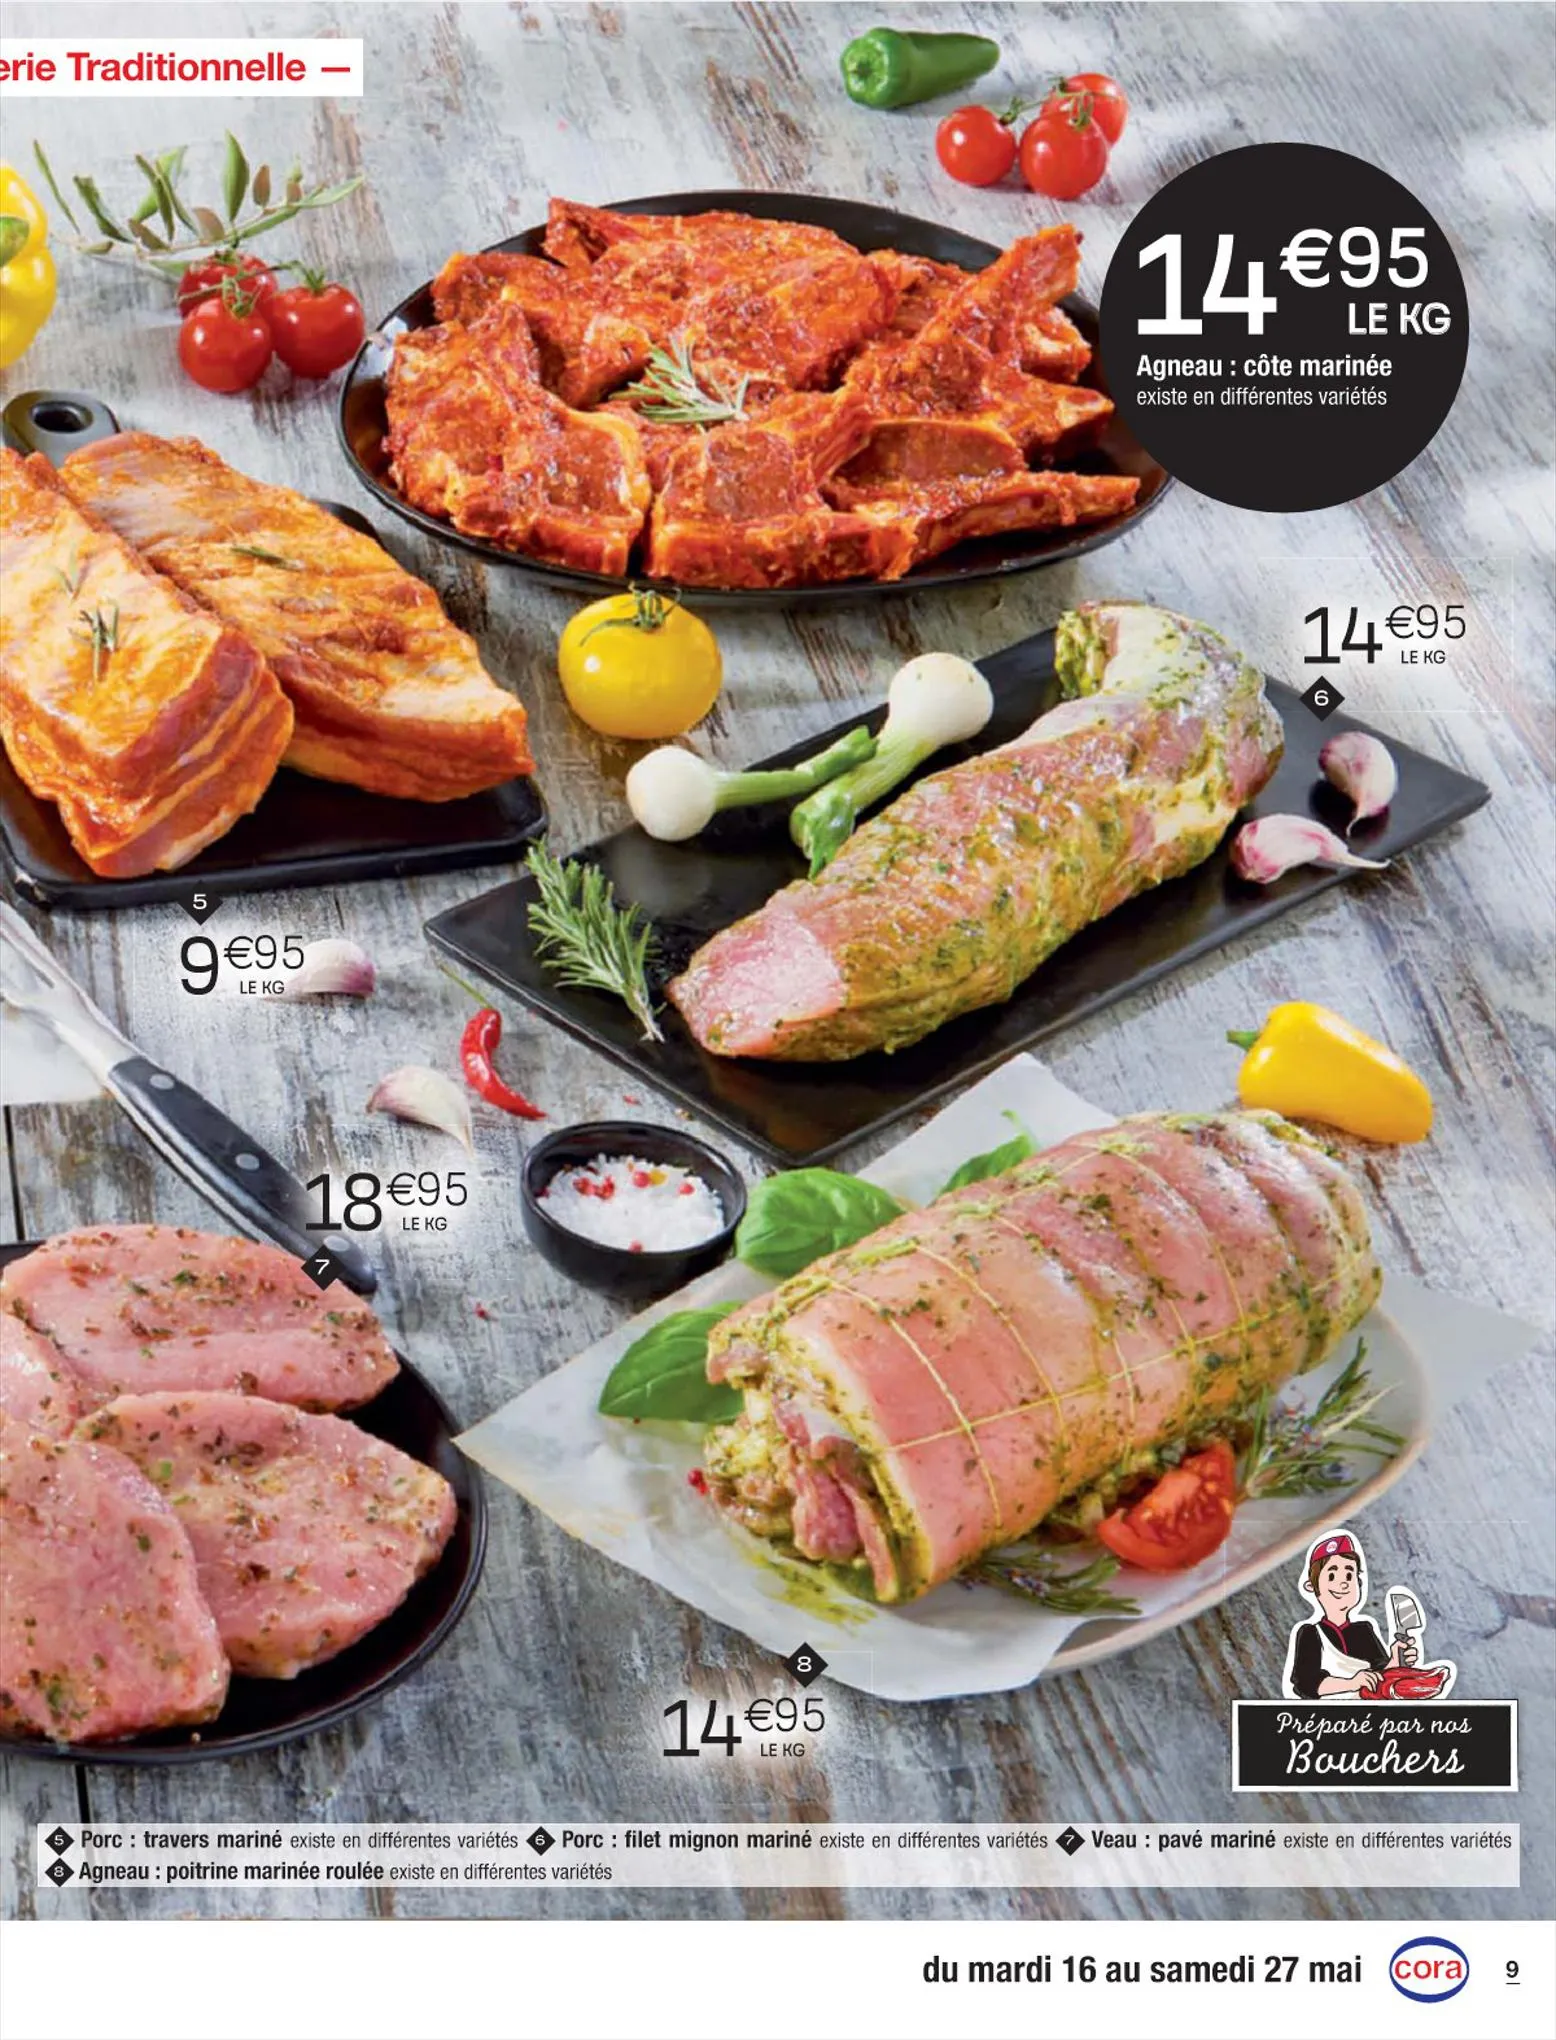 Catalogue Spécial barbecue, page 00009